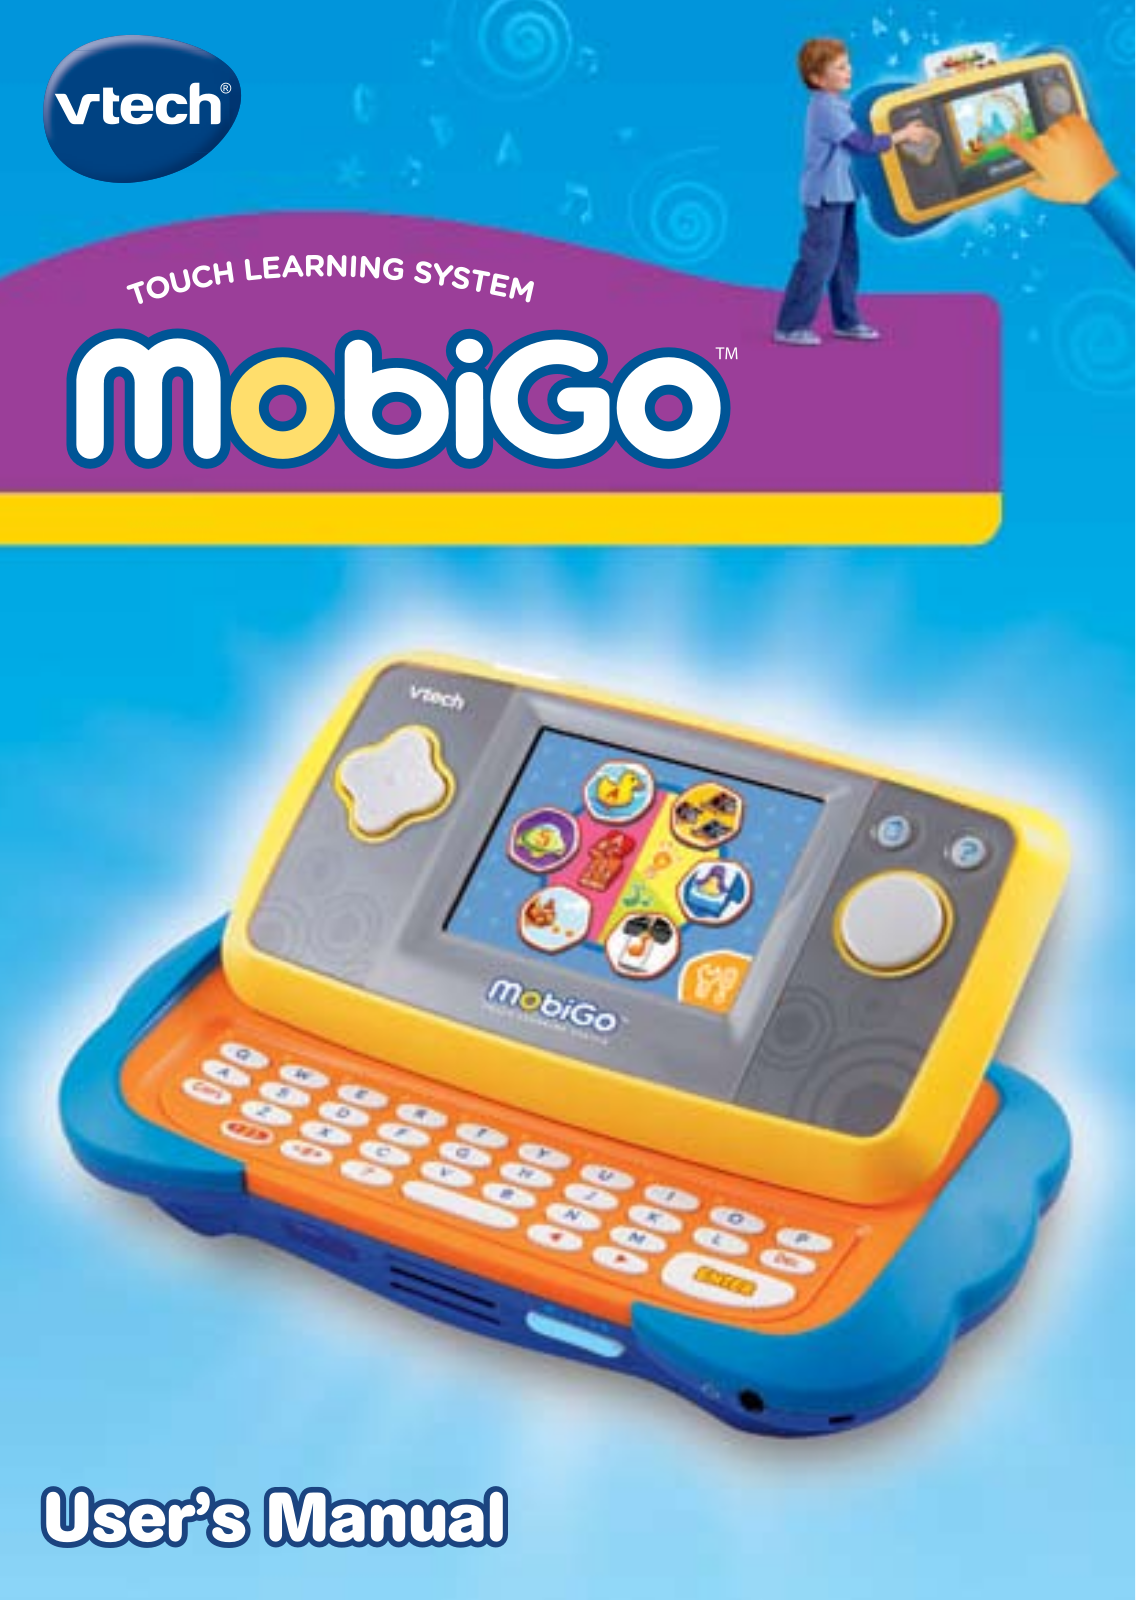 VTech MobiGo Touch Learning System Owner's Manual